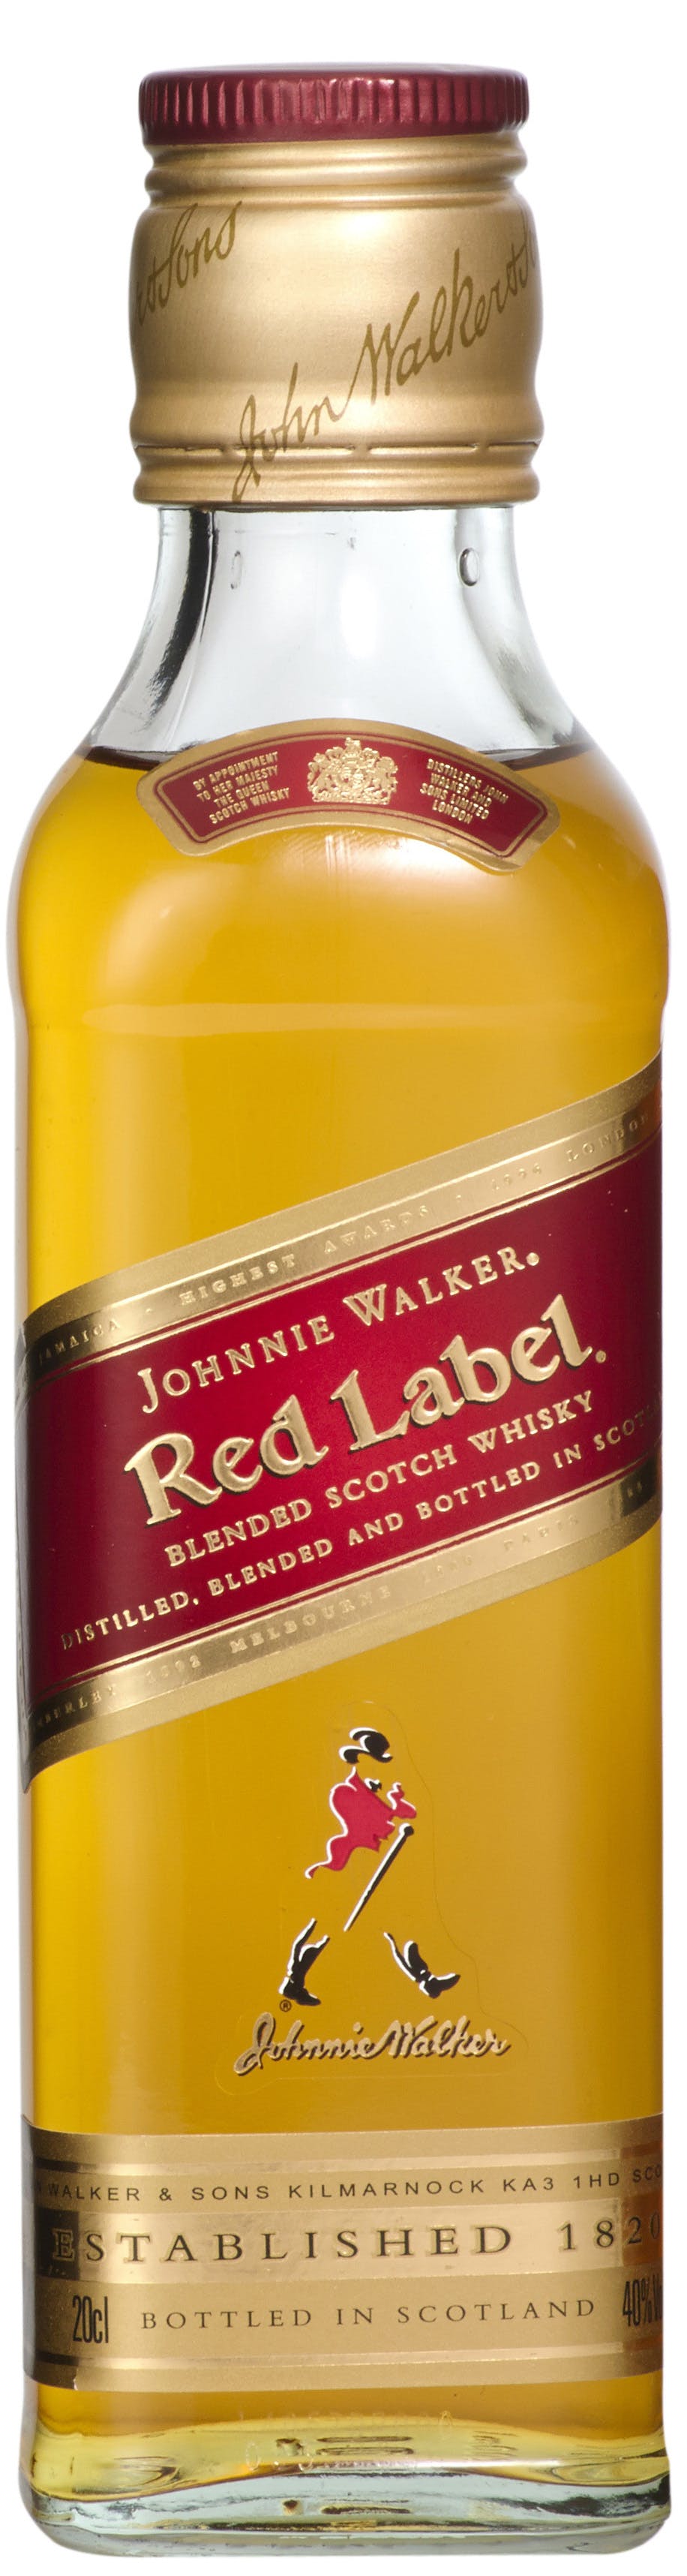 Whisky Avenue Central Walker Scotch Red Label 200ml - Liquors Johnnie Blended